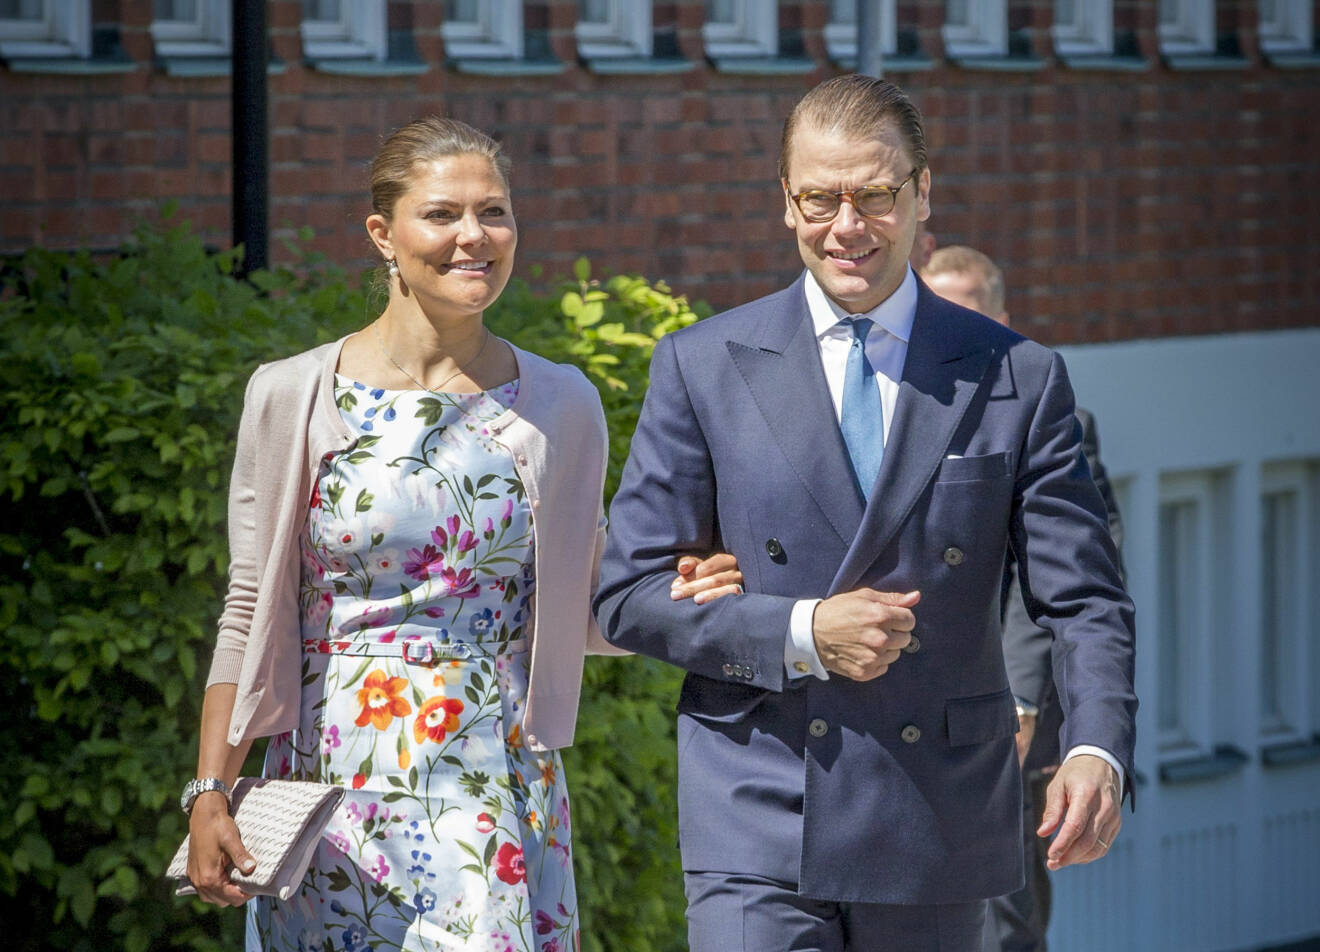 Crown Princess Victoria and Prince Daniel of Sweden attend an citizenship ceremony during the National Day of Sweden in Nacka stadshus, 6 June 2016. Photo: Patrick van Katwijk / NETHERLANDS OUT POINT DE VUE (c) DPA / IBL Bildbyrå